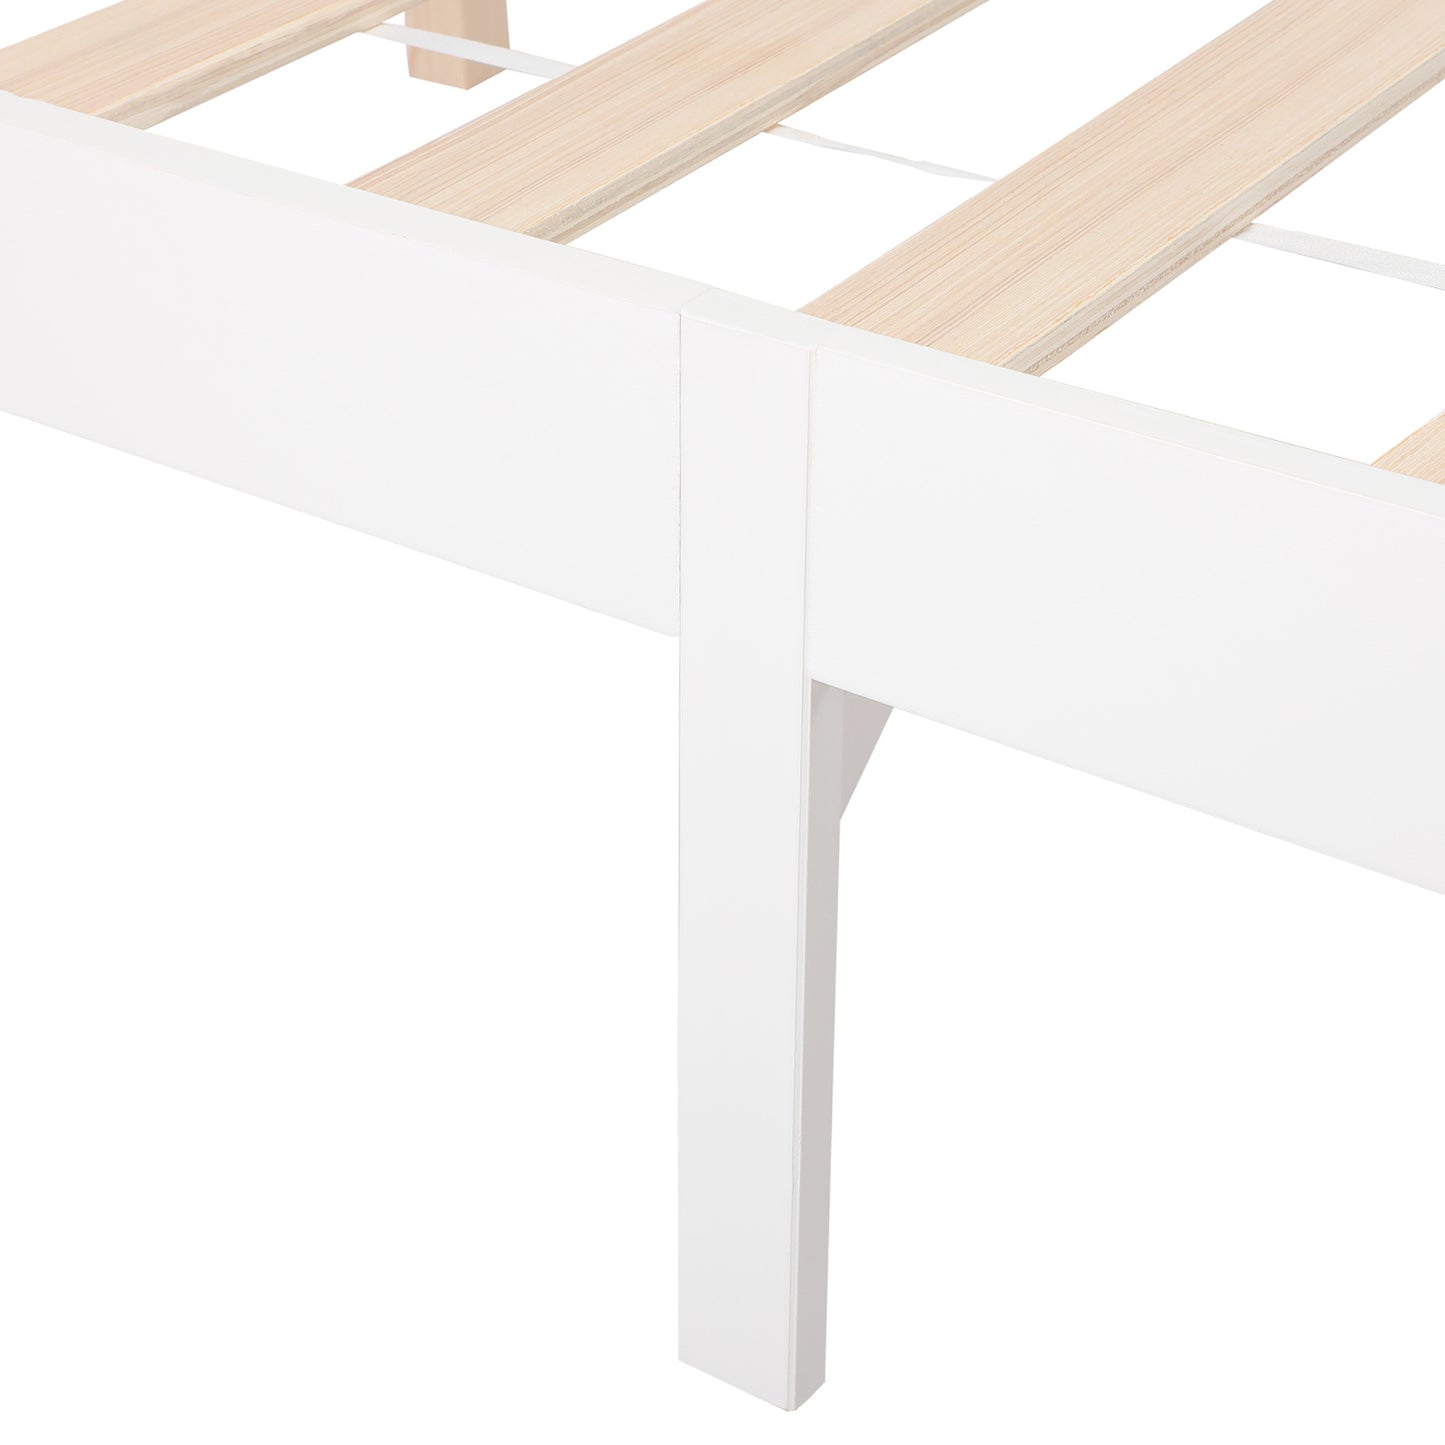 COLE Double Pine Wooden Bed 147.2*196cm - White